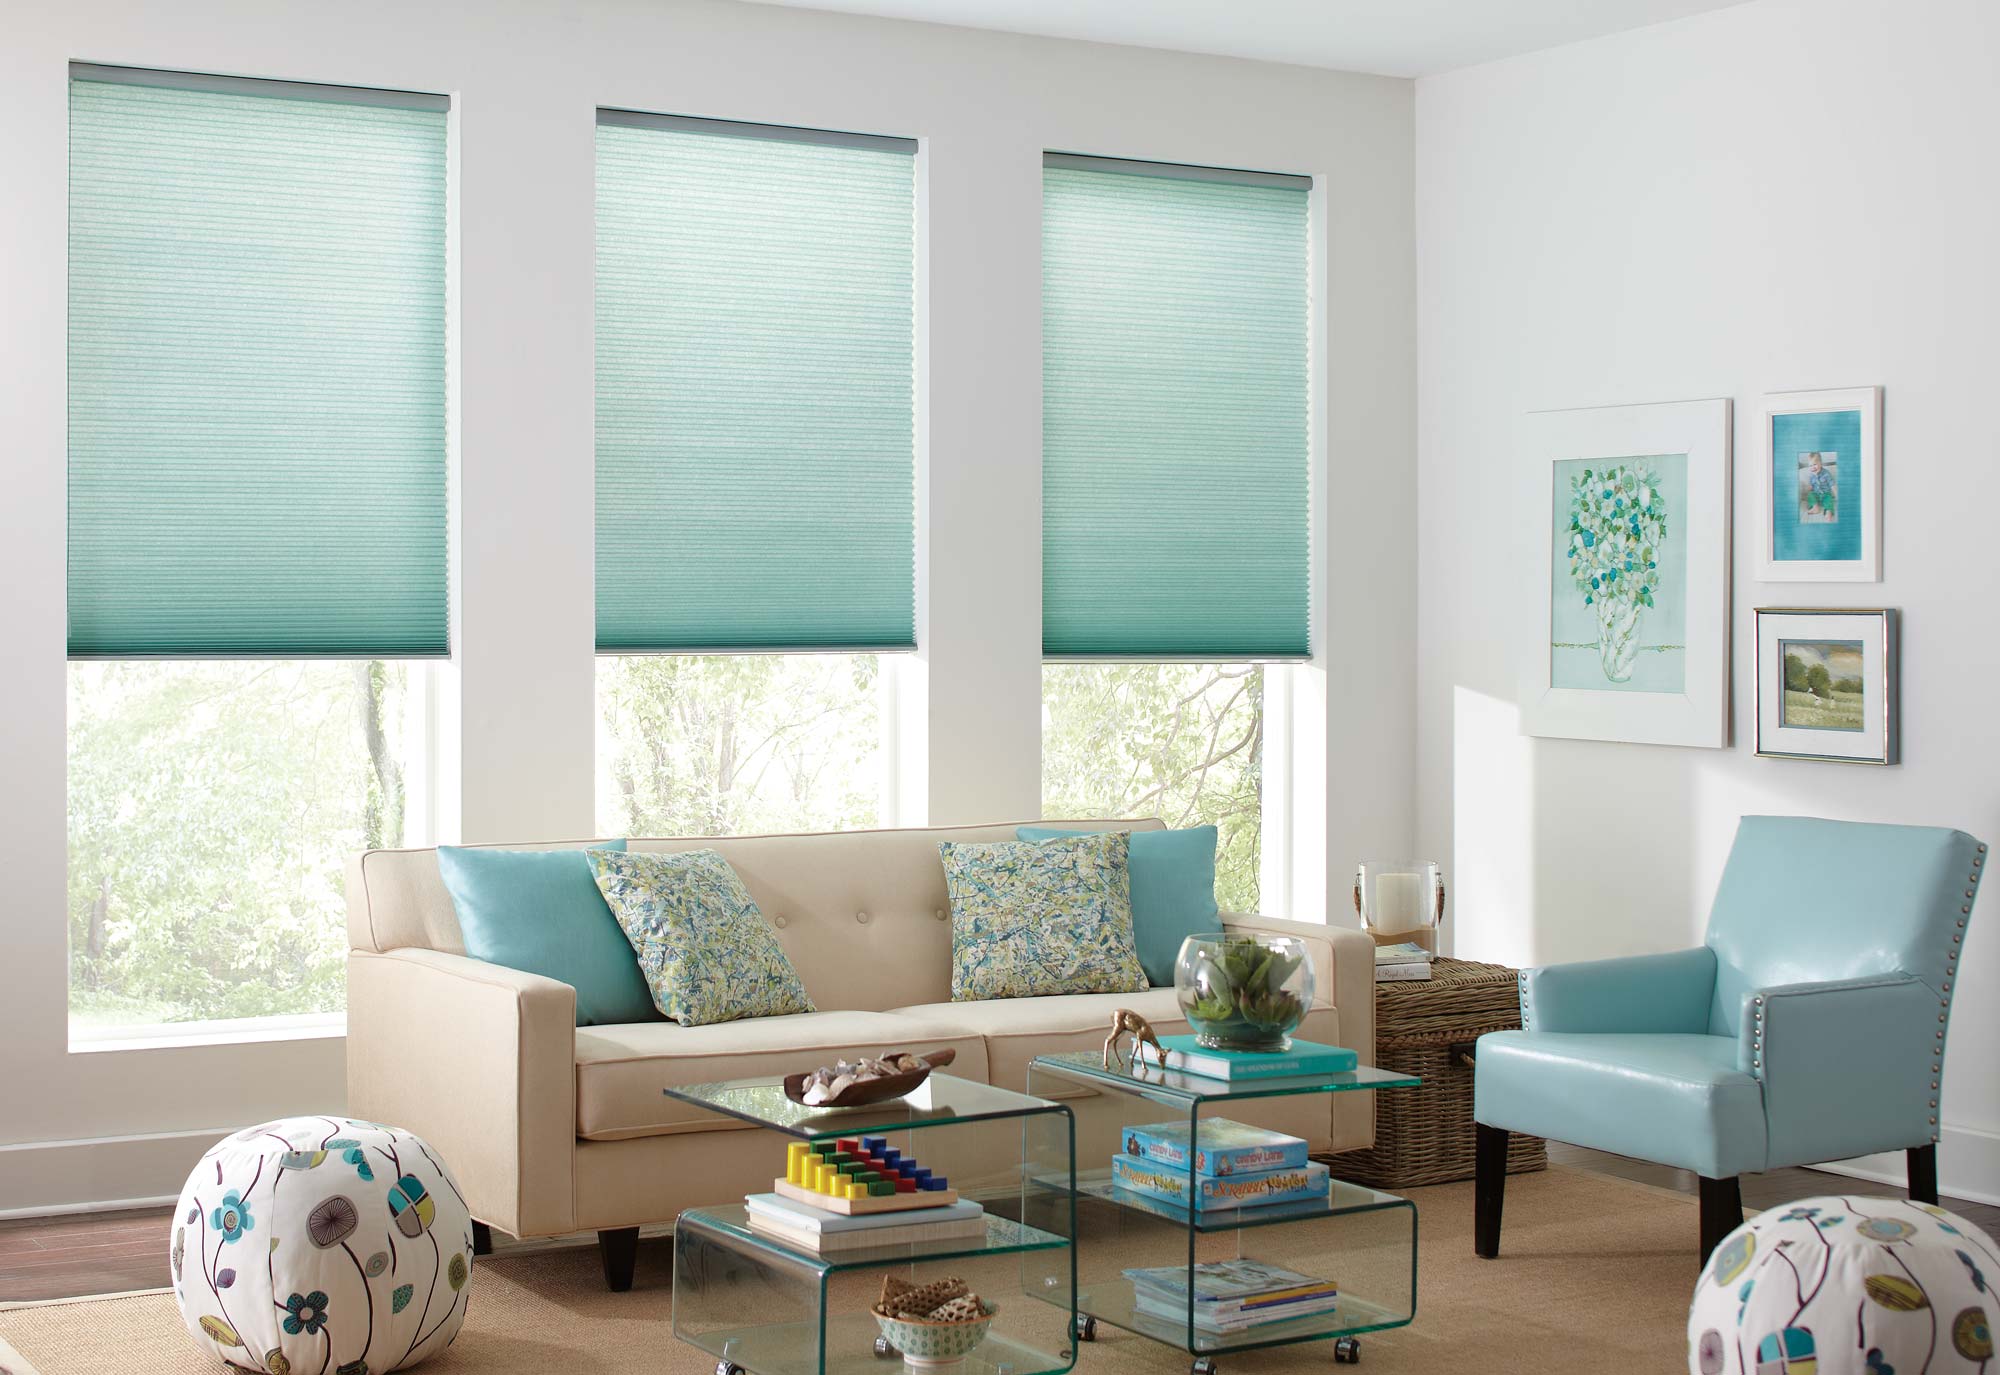 Three aqua colored Parasol® Cellular Shades hang in the windows of a bright family room with custom blue and patterned pillows on a modern cream couch.